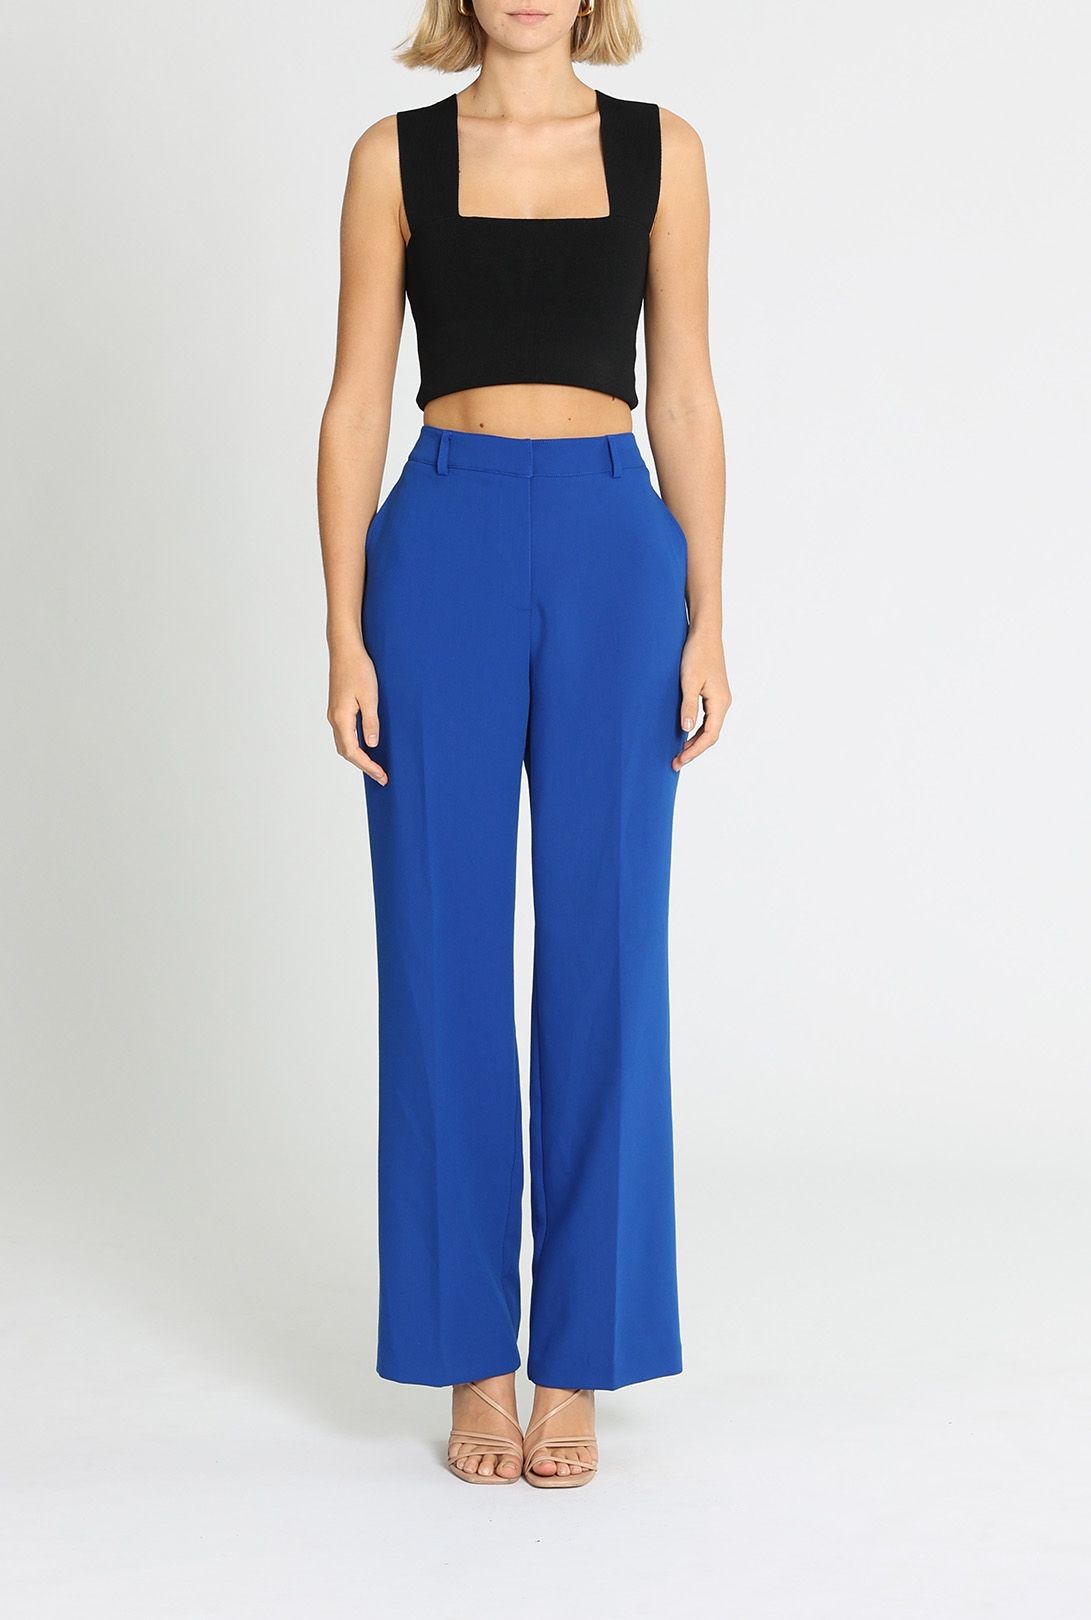 Joie Royal Blue Trousers